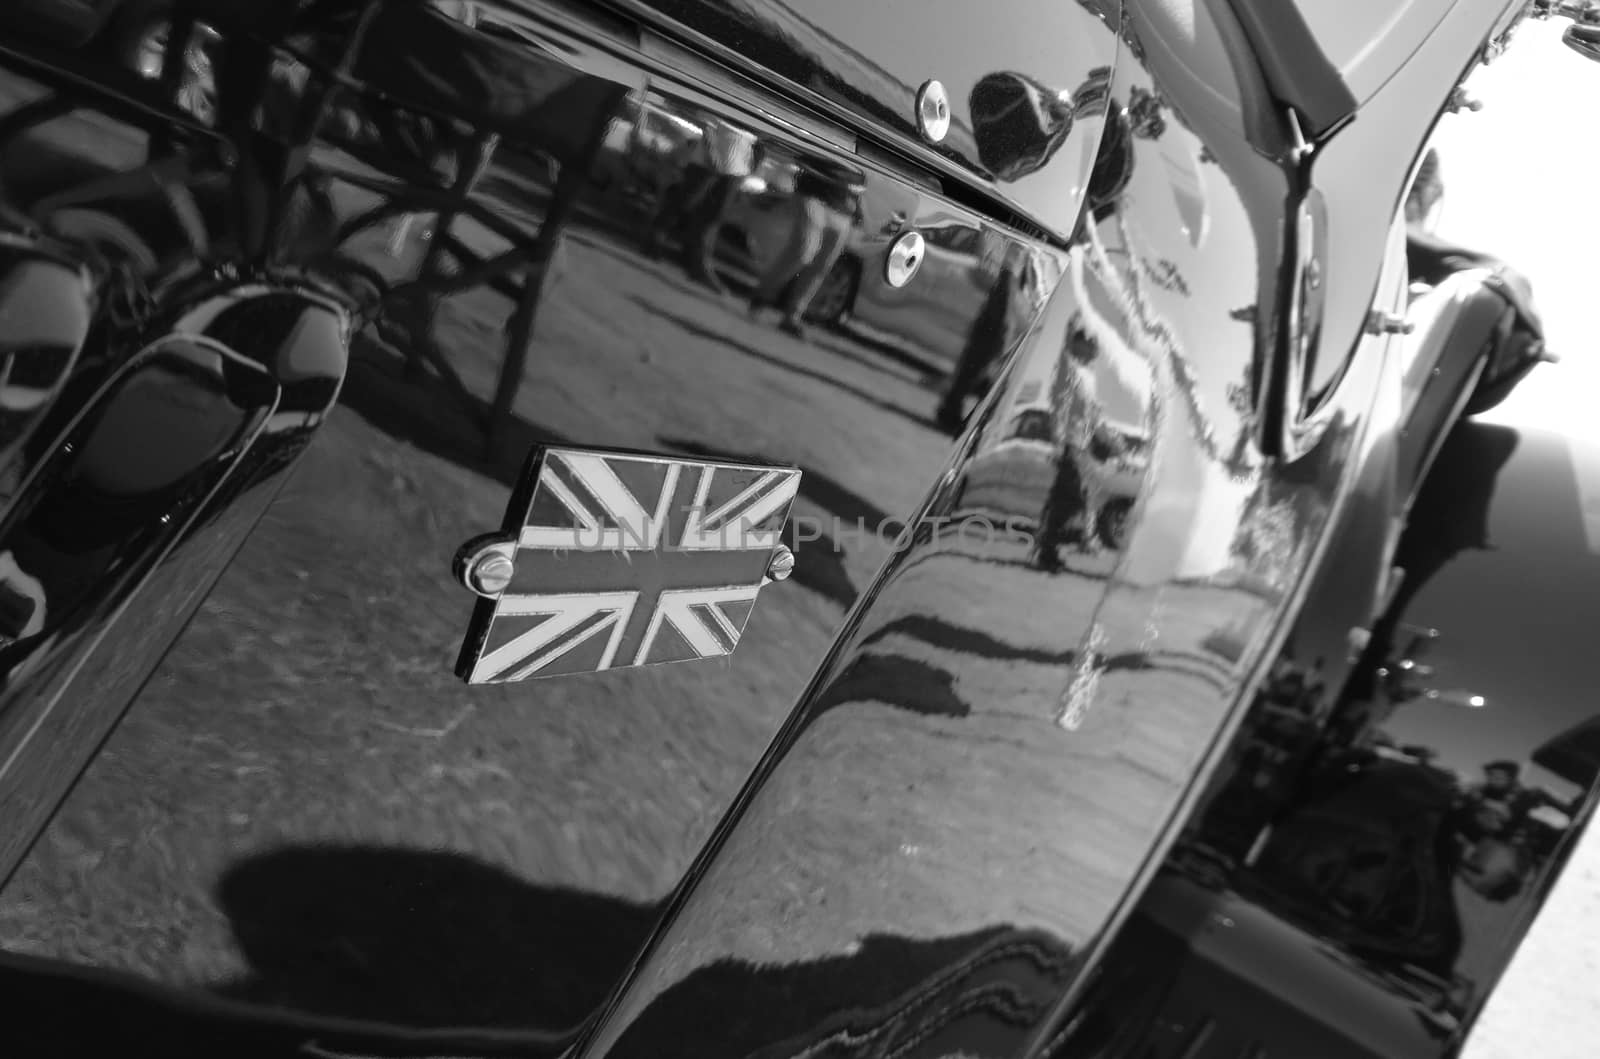 United Kingdom National Union Jack logo on classical car in black and white